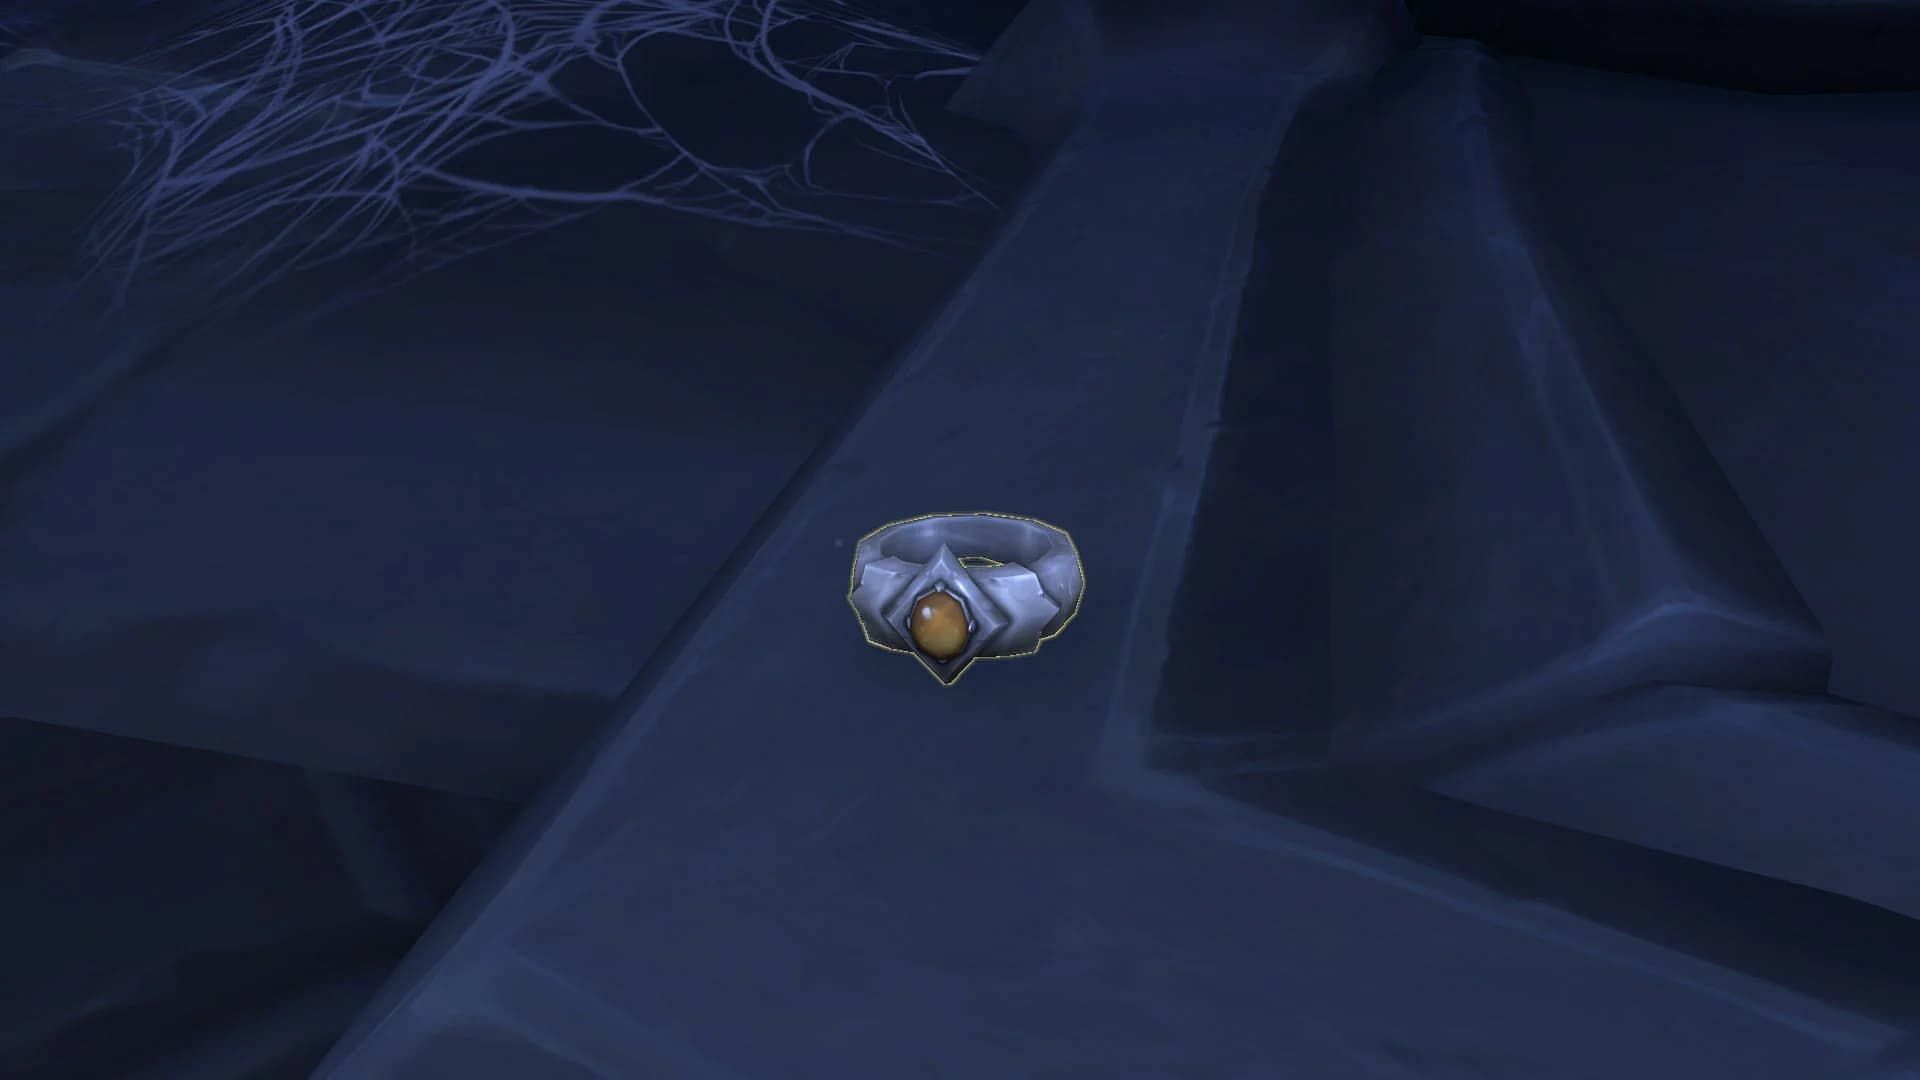 You need to pick up this ring to start The Forgotten Ring quest in World of Warcraft: Dragonflight (Image via Blizzard)